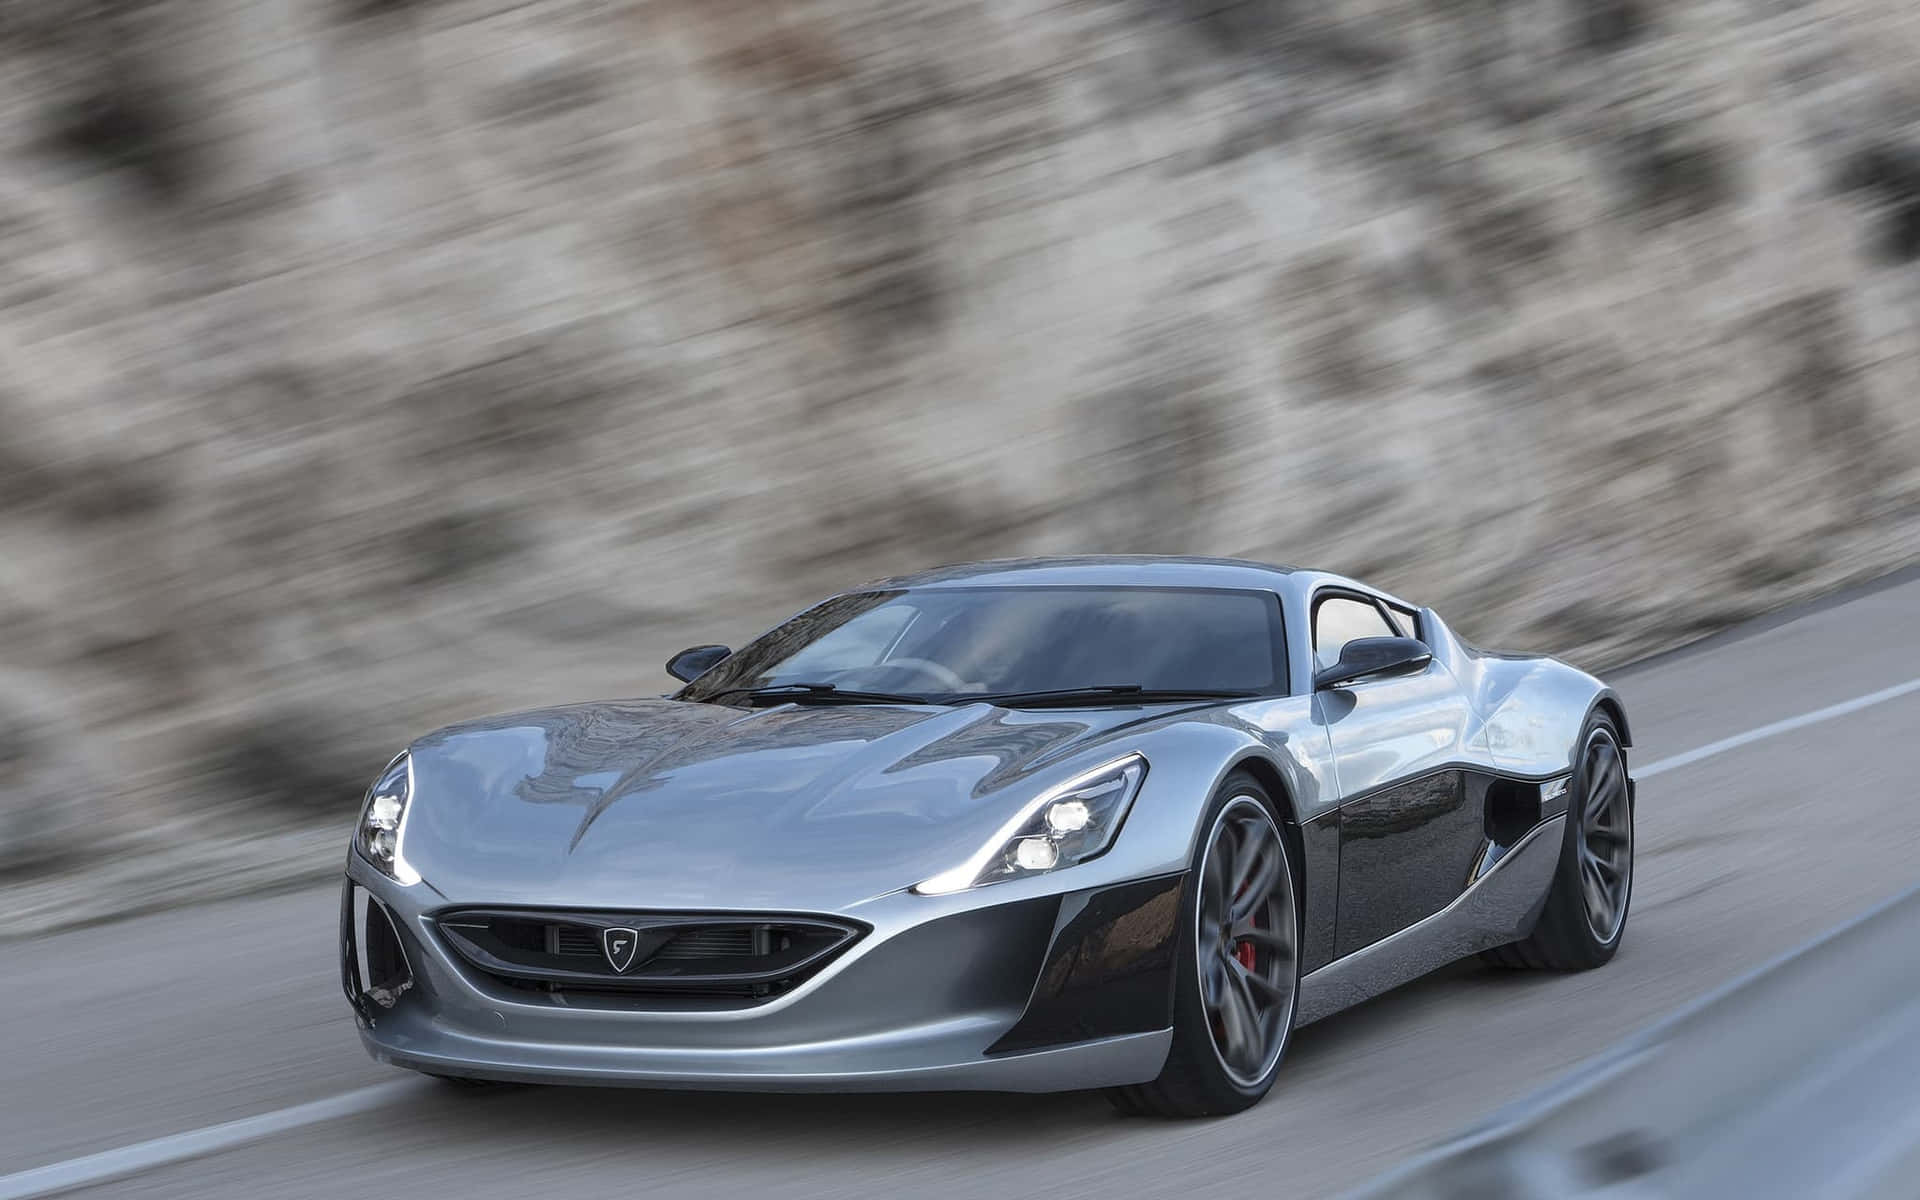 Rimac Concept One - High-speed Luxury Electric Car Wallpaper